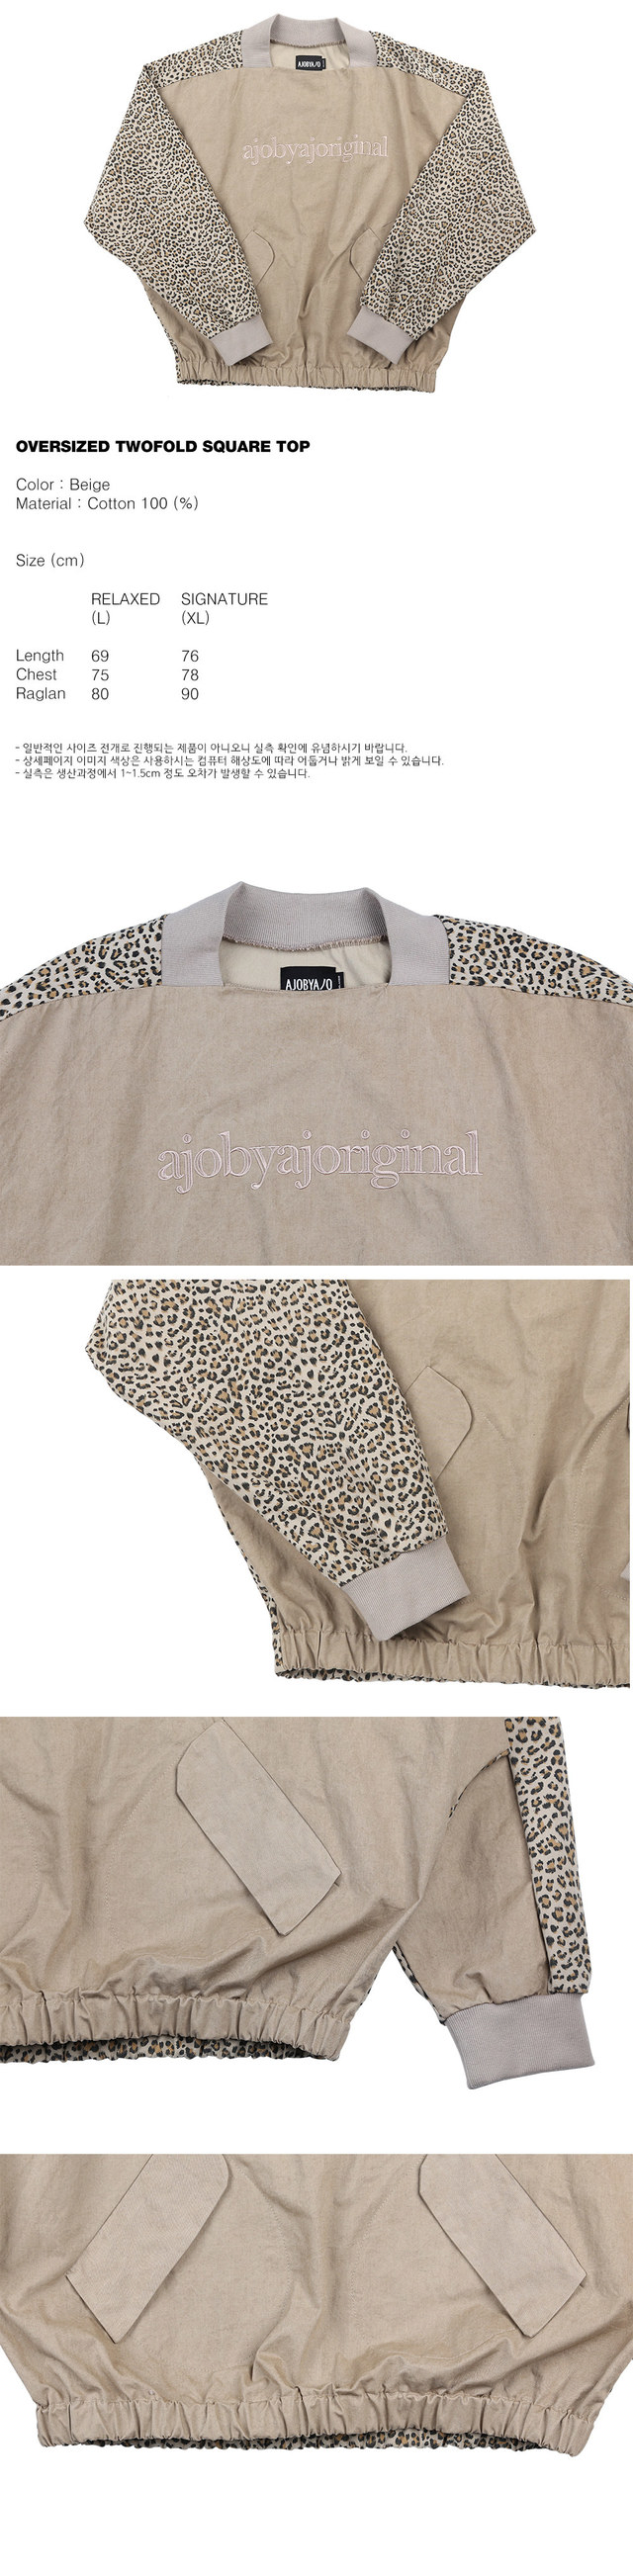 Oversized Twofold Square Top [Beige] - AJOBYAJO